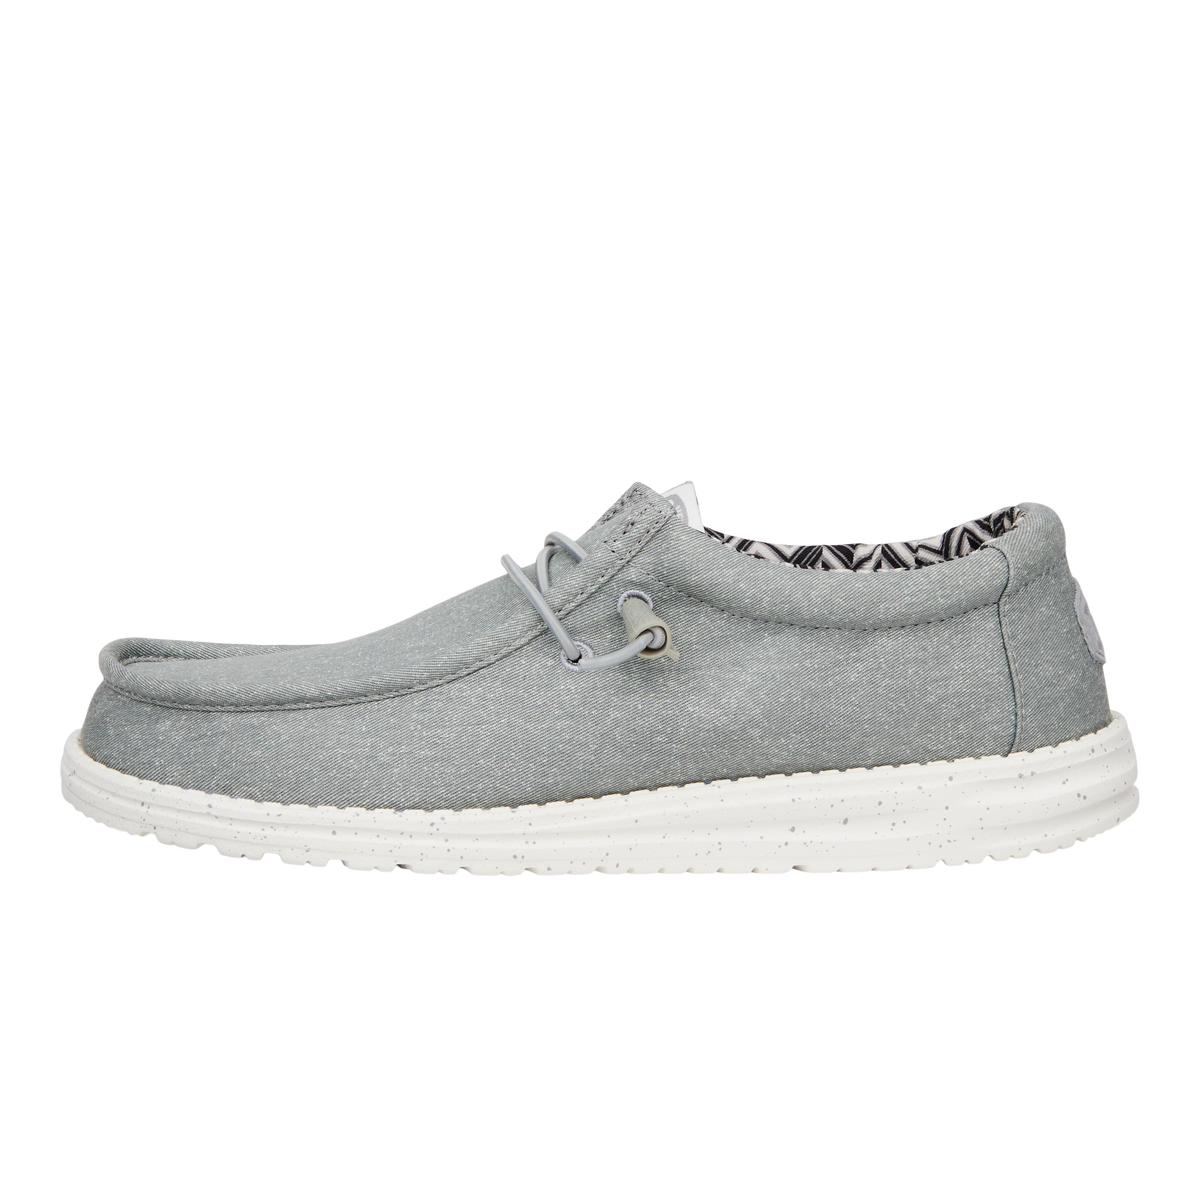 Wally Canvas Men's Wide Slip On Shoes Light Grey | HEYDUDE & HEYDUDE shoes